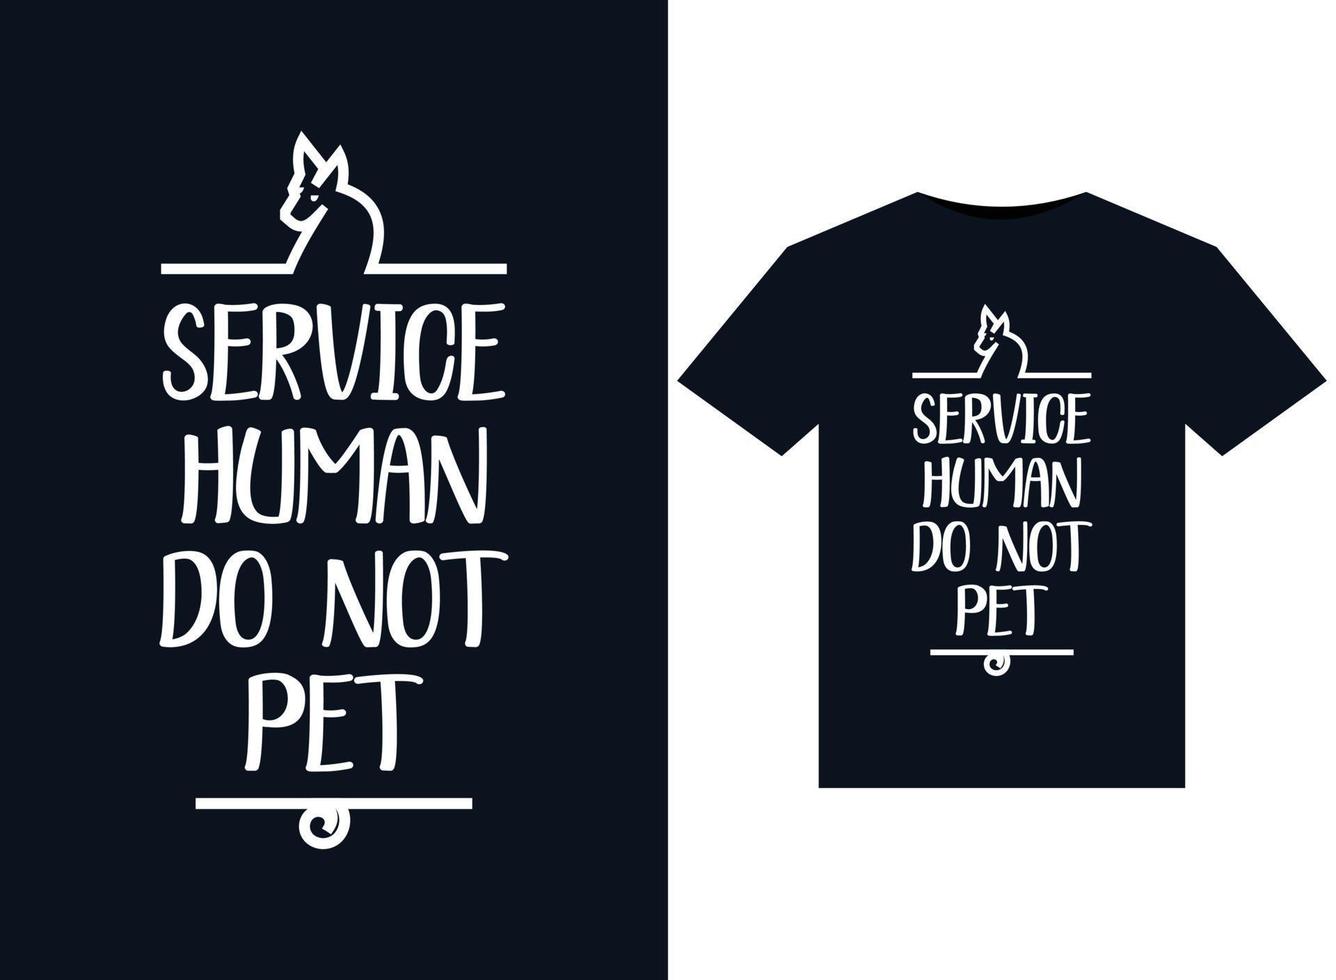 Service human do not pet illustrations for print-ready T-Shirts design vector